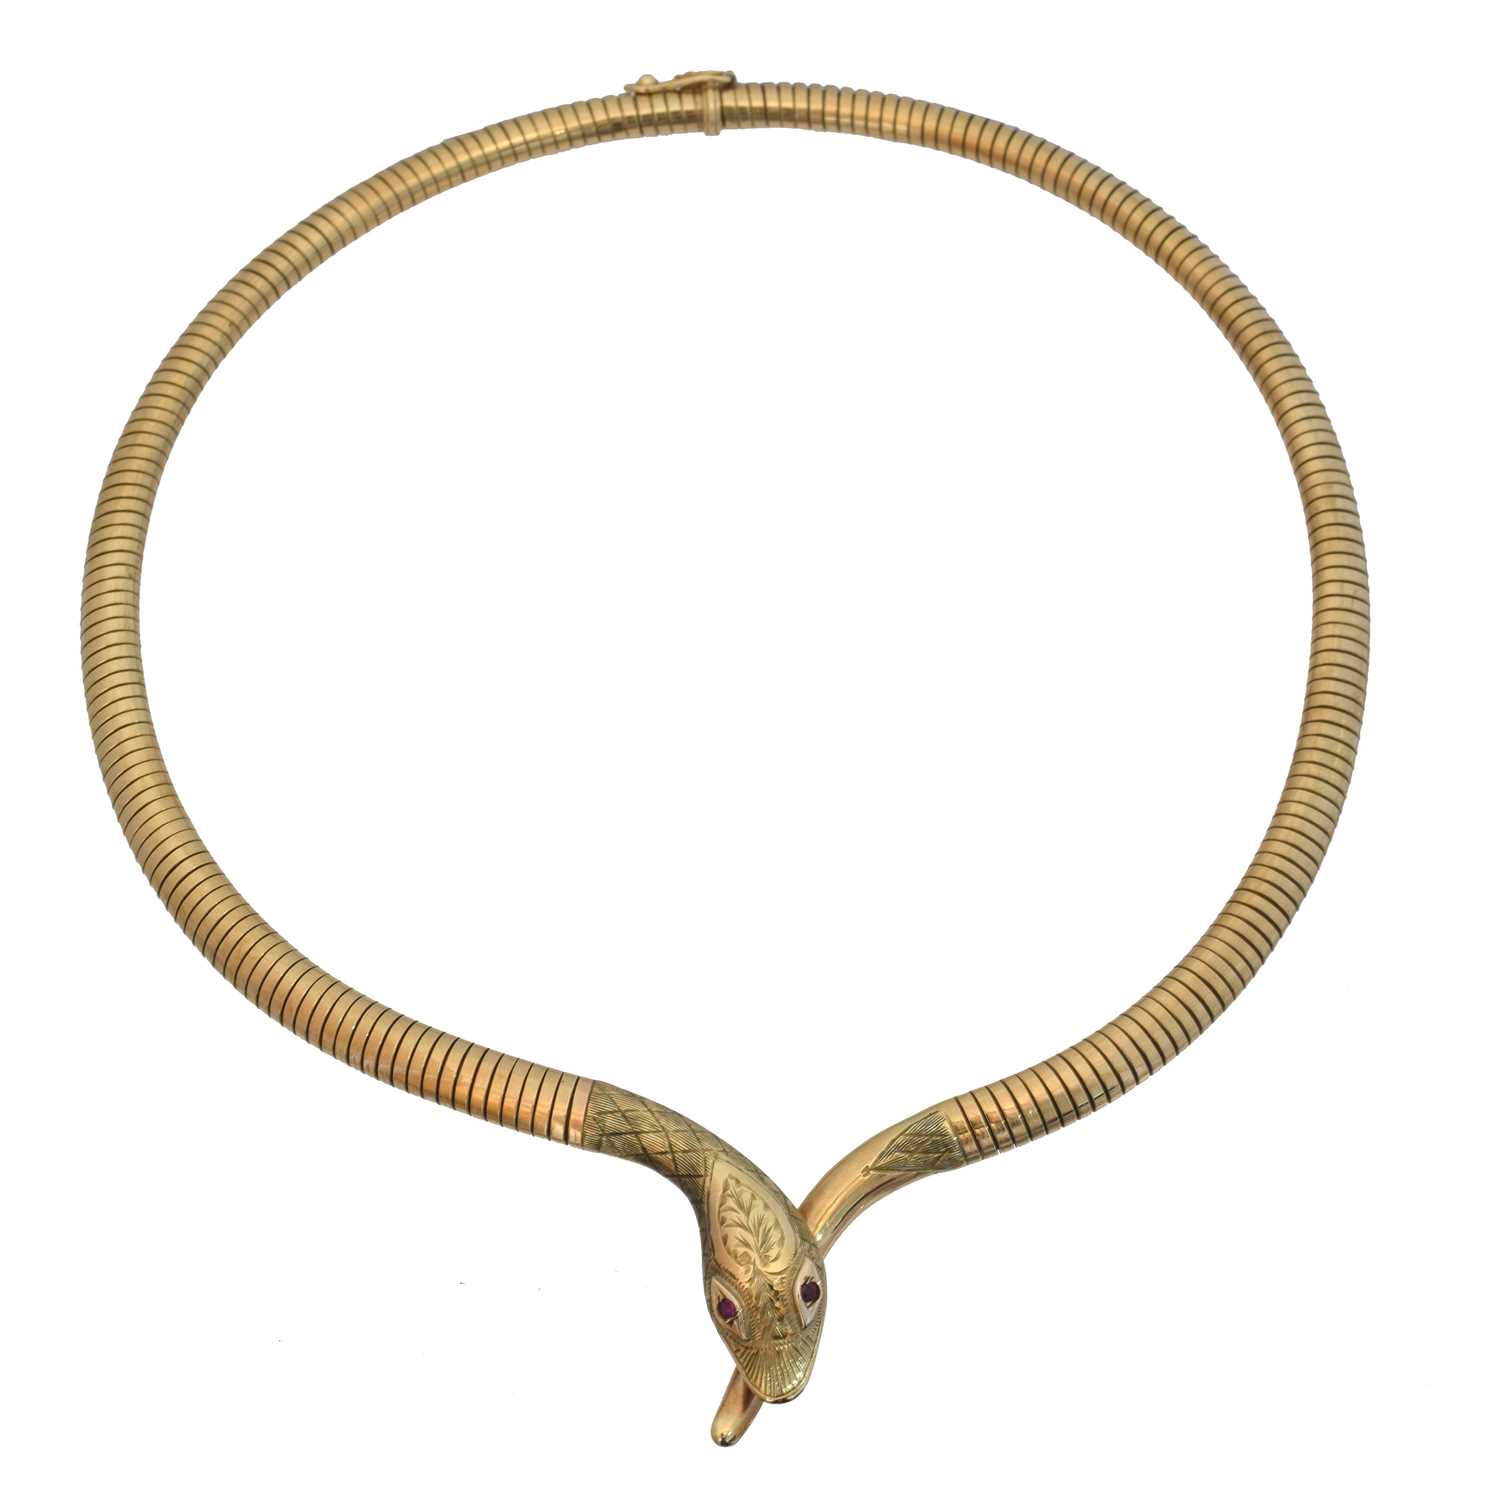 Lot 82 - A 9ct gold snake necklace by Cropp & Farr.